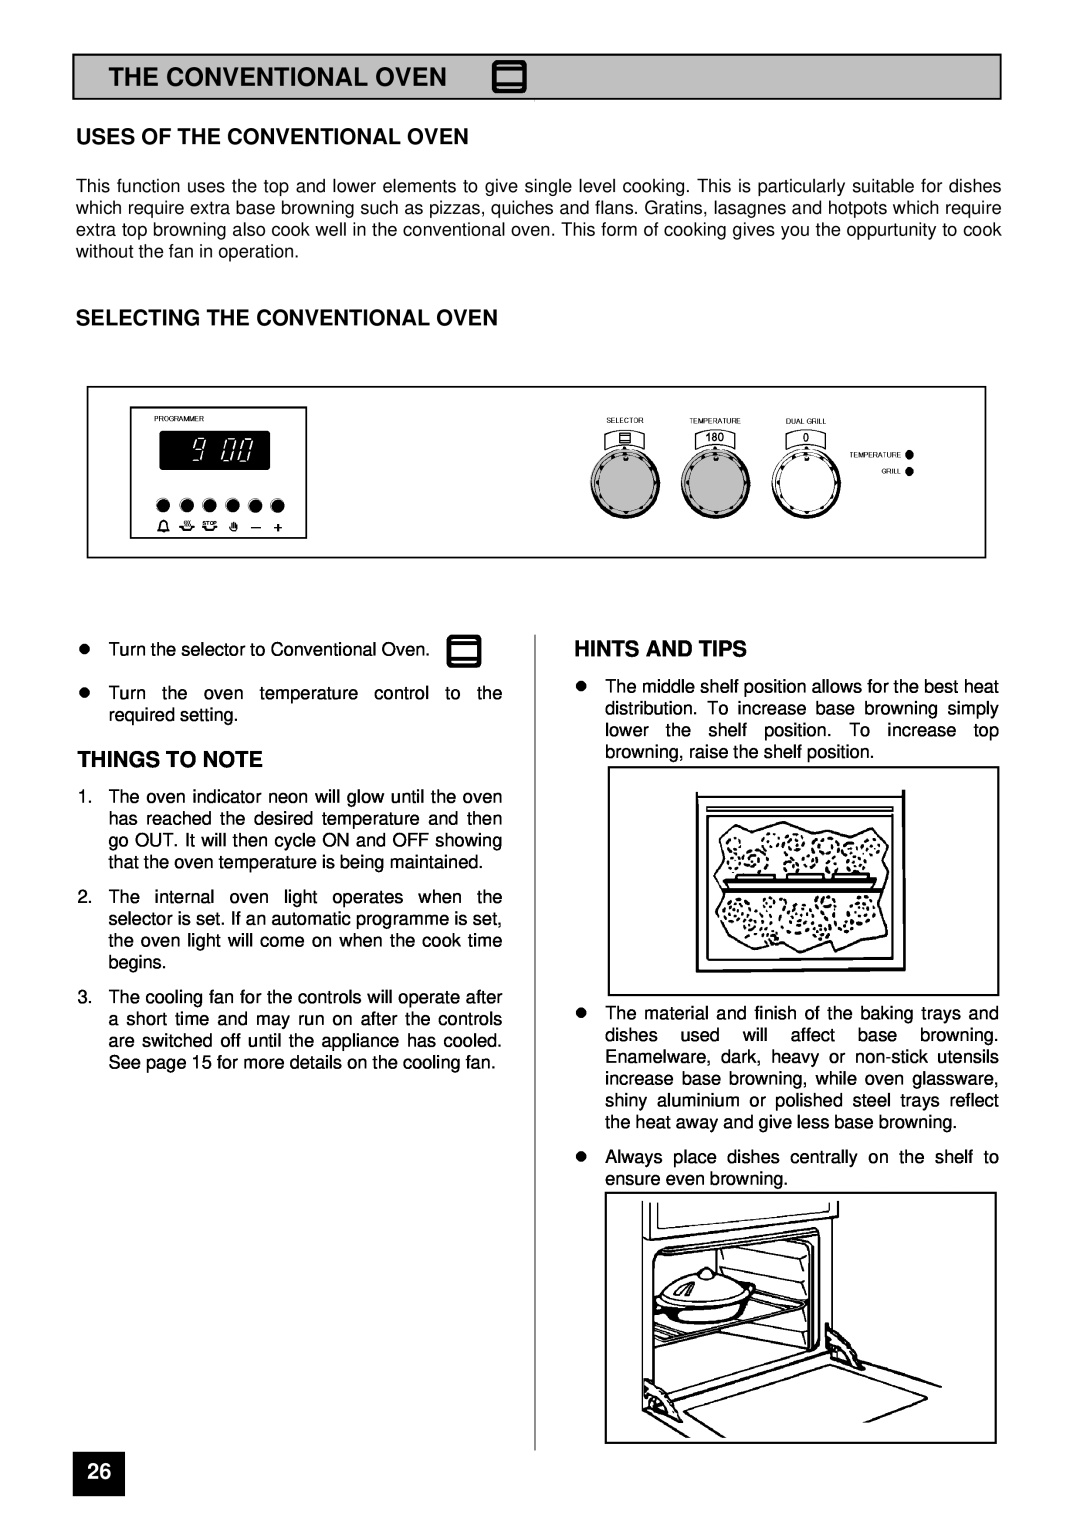 Tricity Bendix SURREY Uses Of The Conventional Oven, Selecting The Conventional Oven, Things To Note, Hints And Tips 